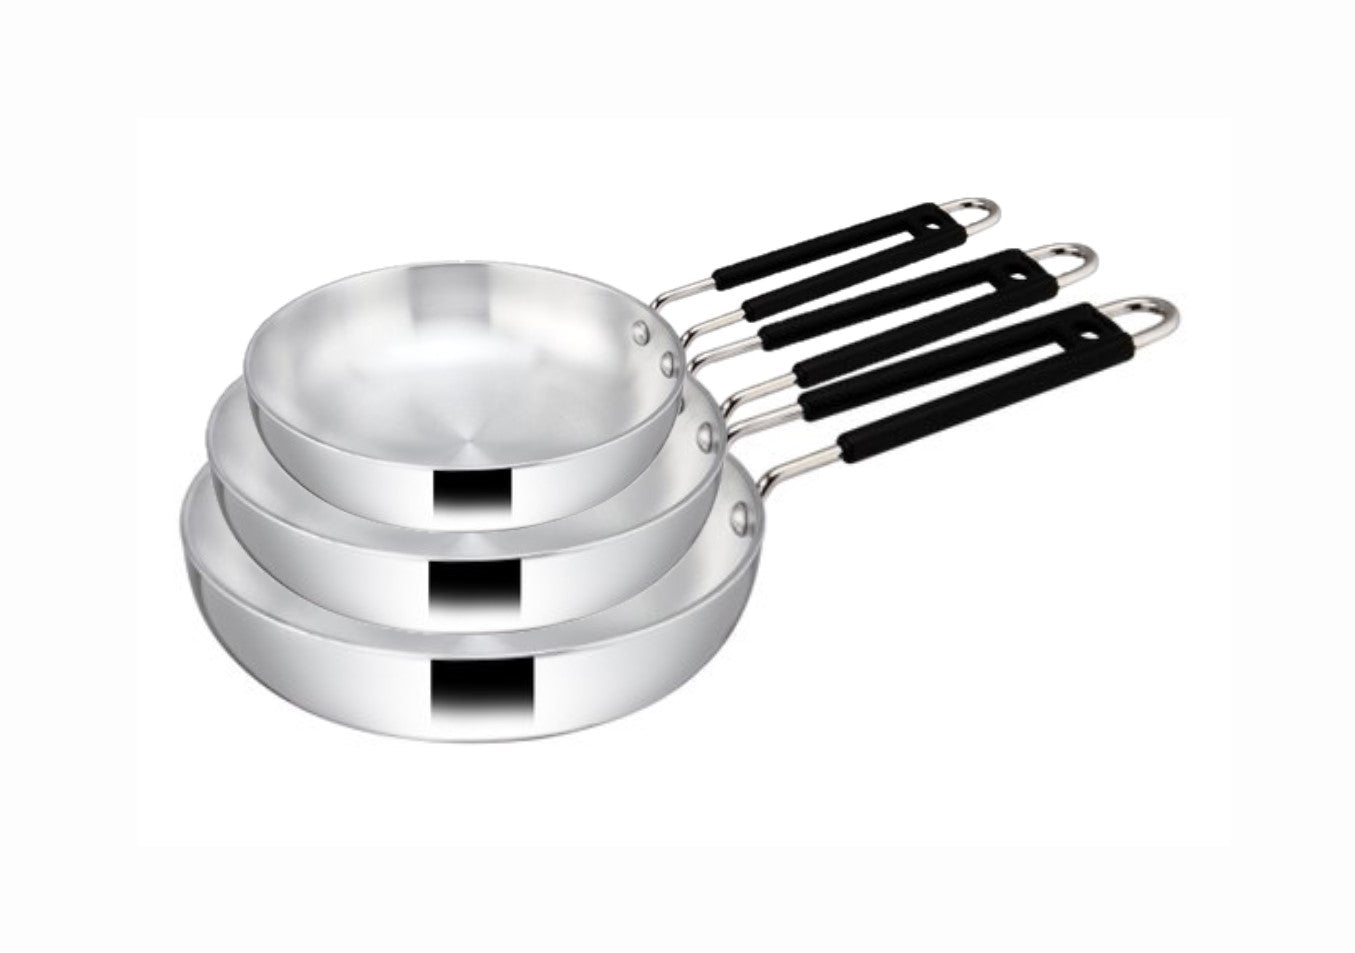 9" Aluminum Fry Pan with PVC Wire Handle